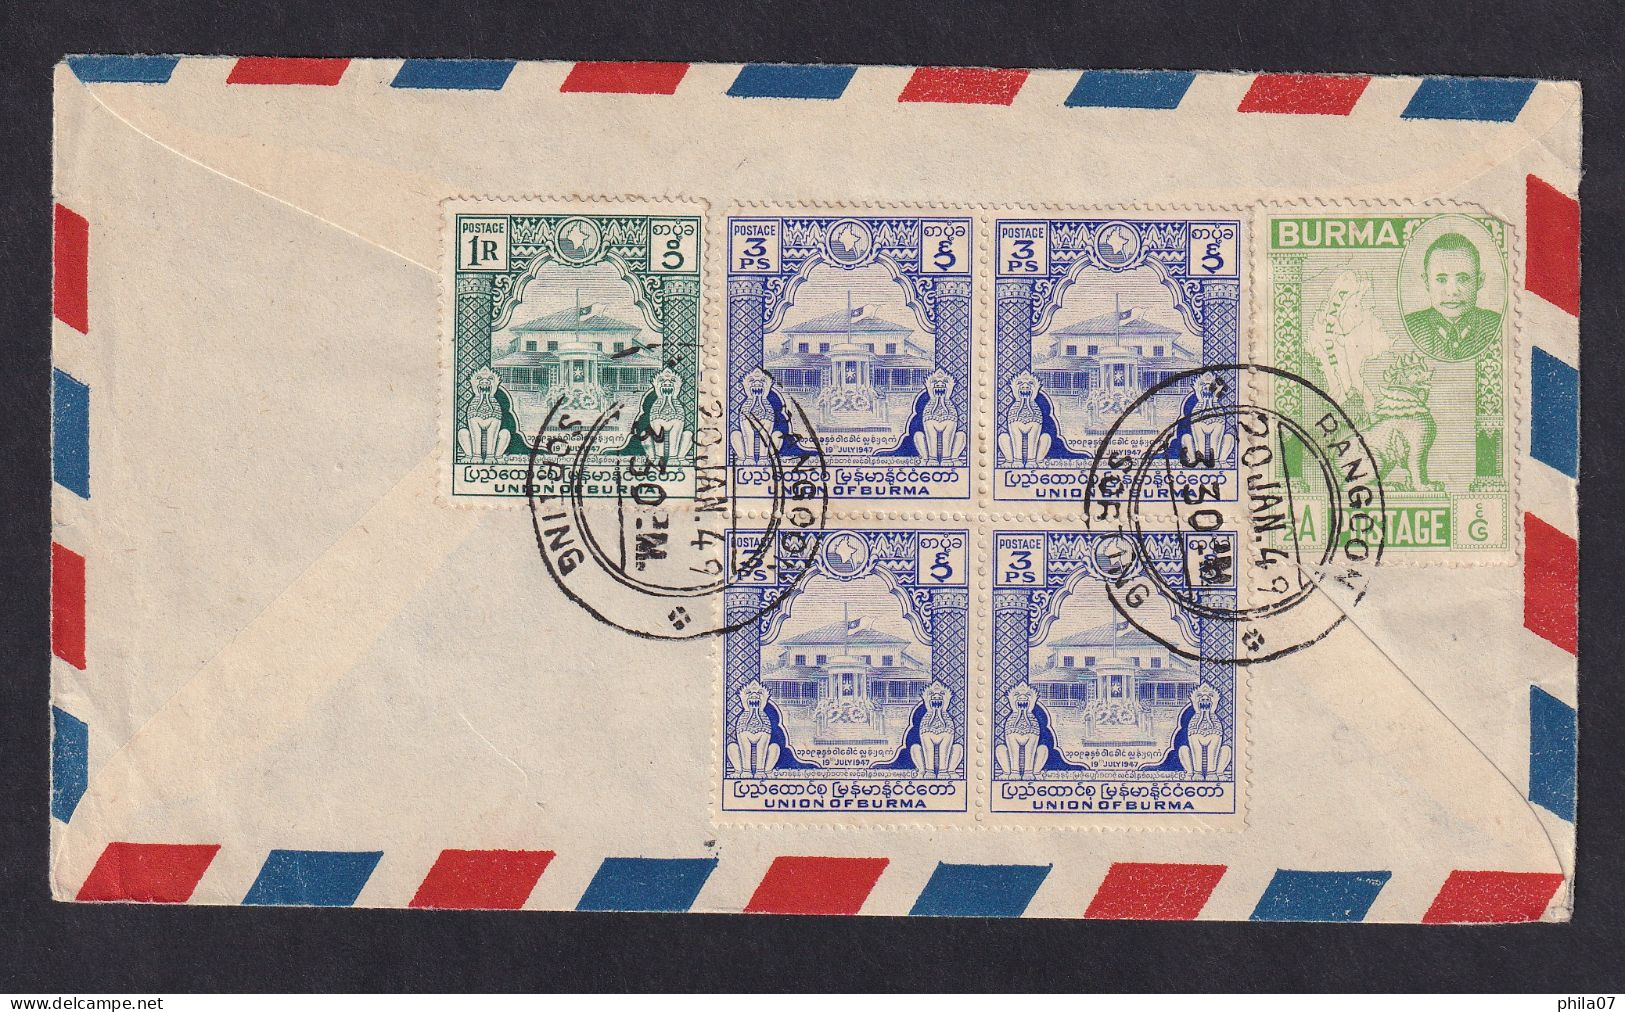 BURMA - Envelope Sent Via Air Mail From Rangoon To USA 1949, Nice Mass Franking On The Back / 2 Scans - Sonstige - Asien